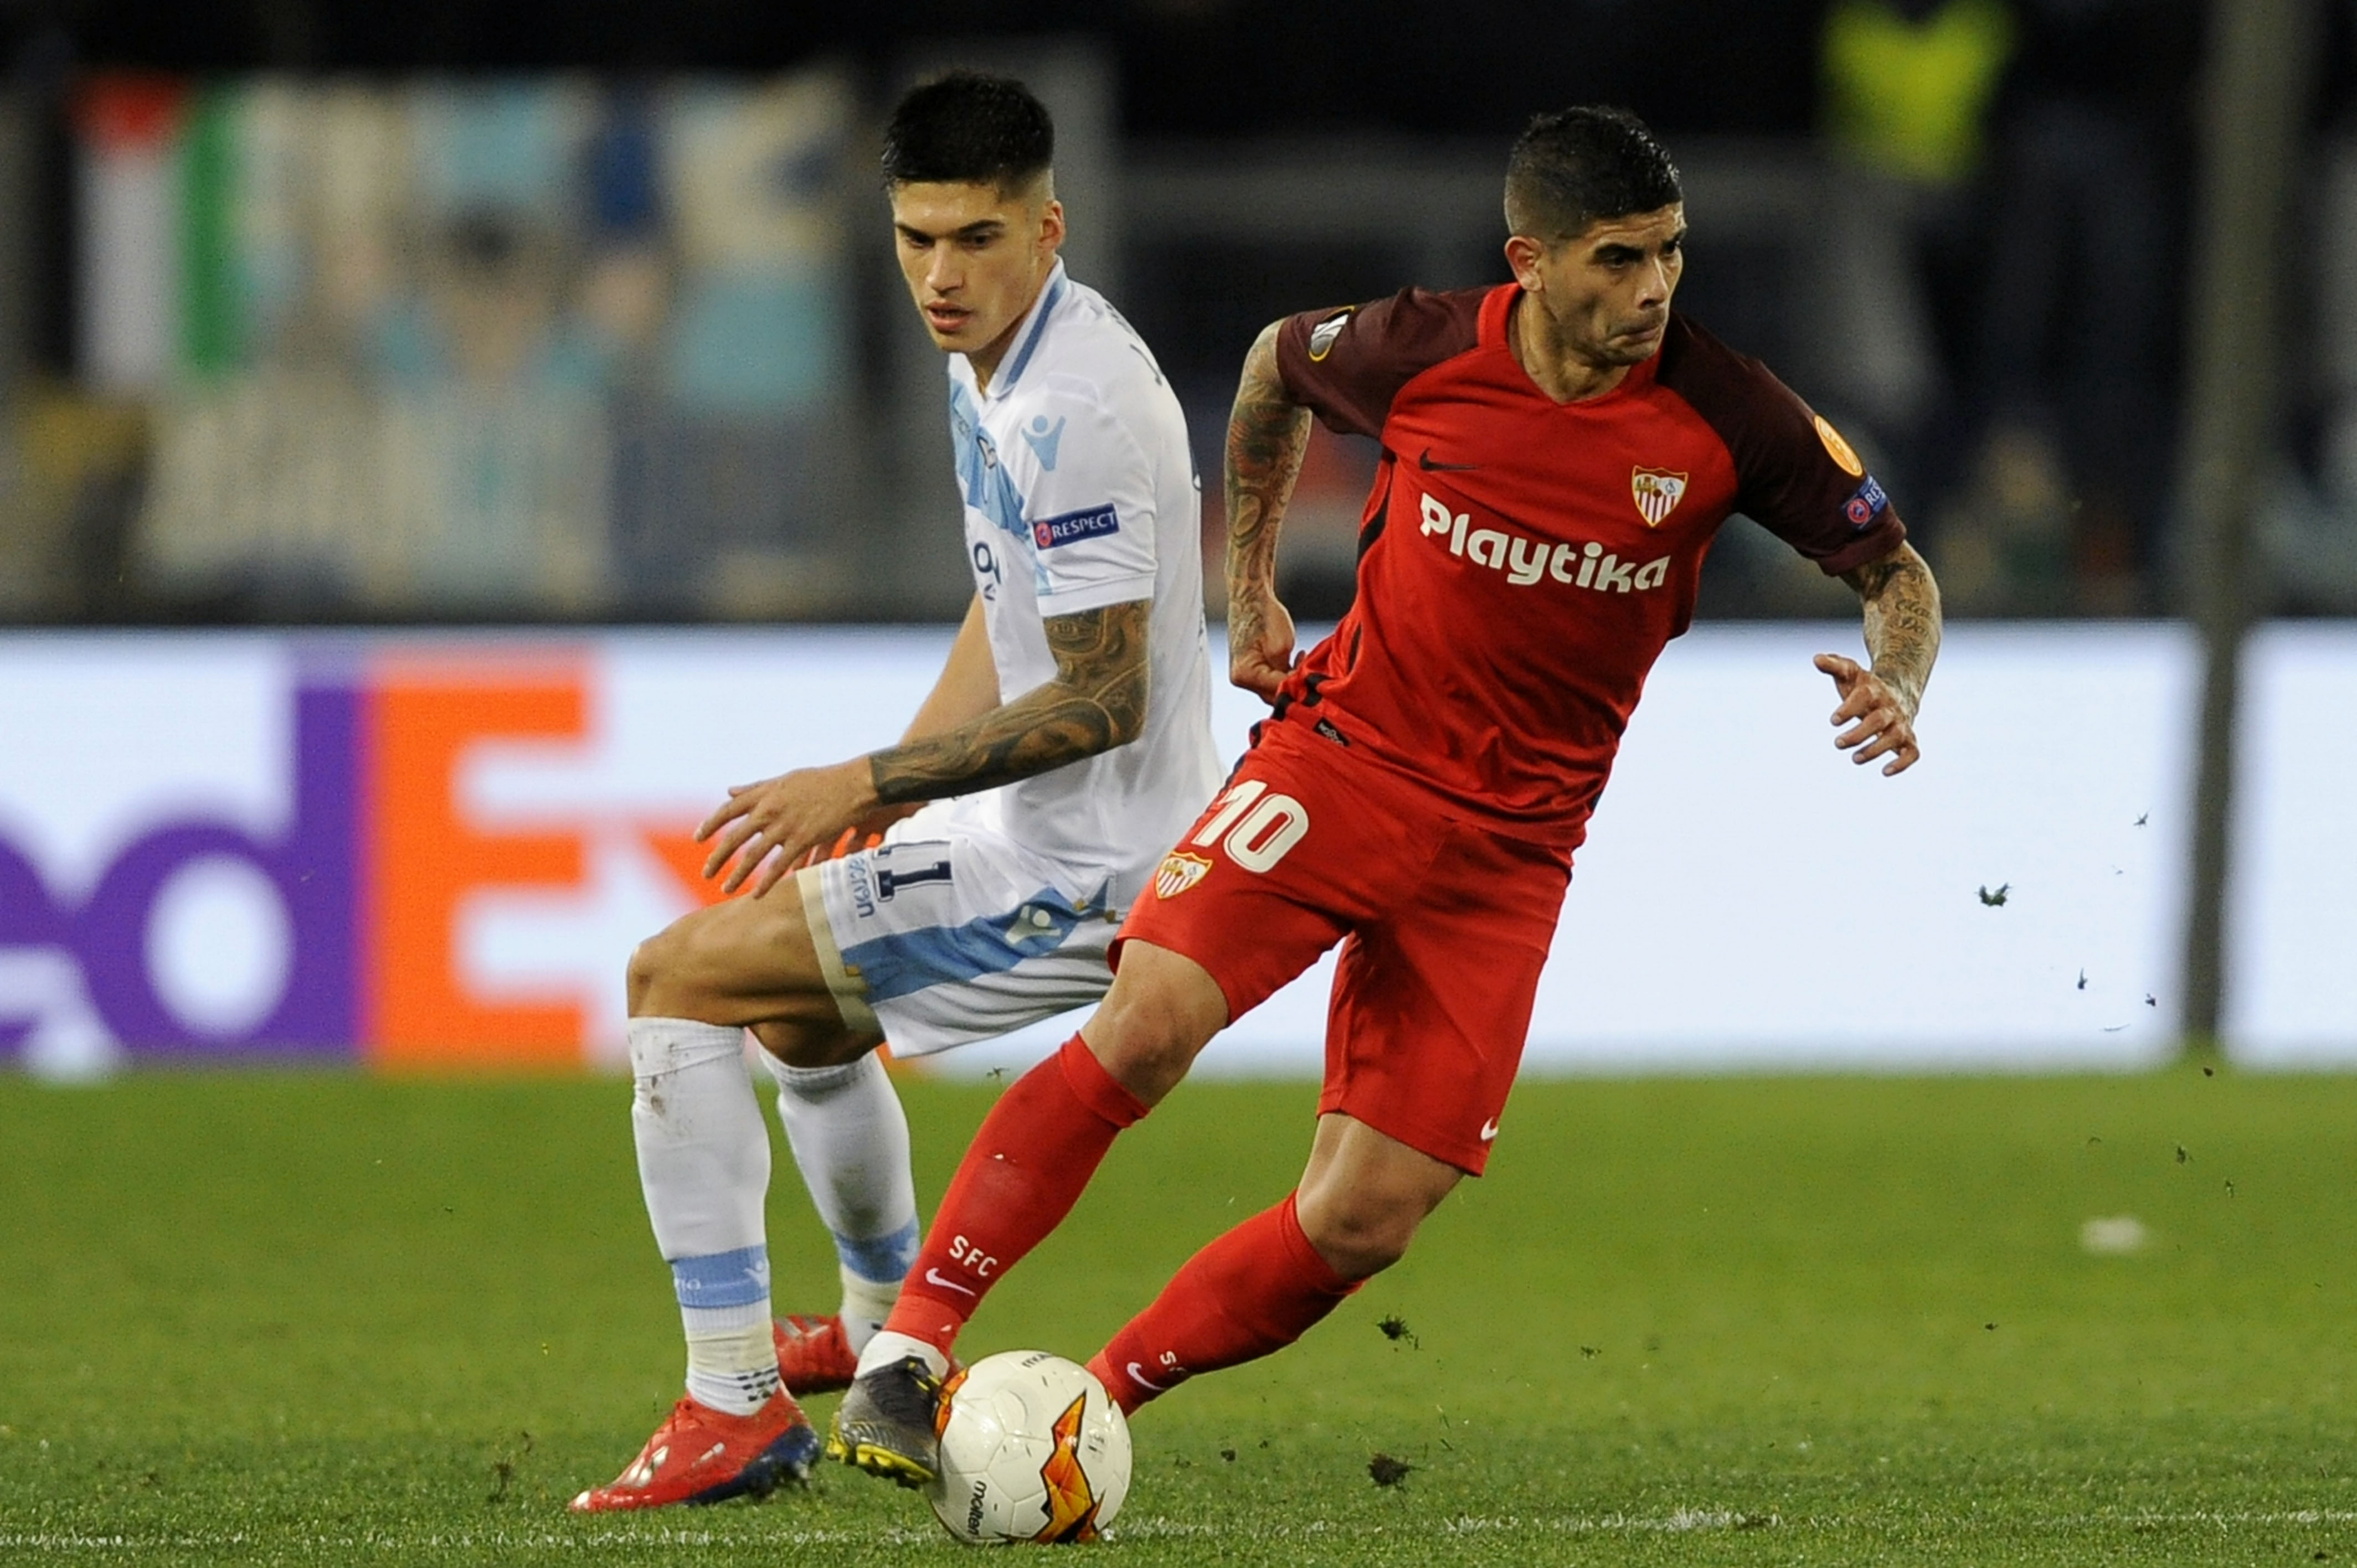 ROME, ITALY - FEBRUARY 14:  Joaquin Correa of SS Lazio competes for the ball with Ever Banega of Sevilla during the UEFA Europa League Round of 32 First Leg match between SS Lazio and Sevilla at Stadio Olimpico on February 14, 2019 in Rome, Italy.  (Photo by Marco Rosi/Getty Images)